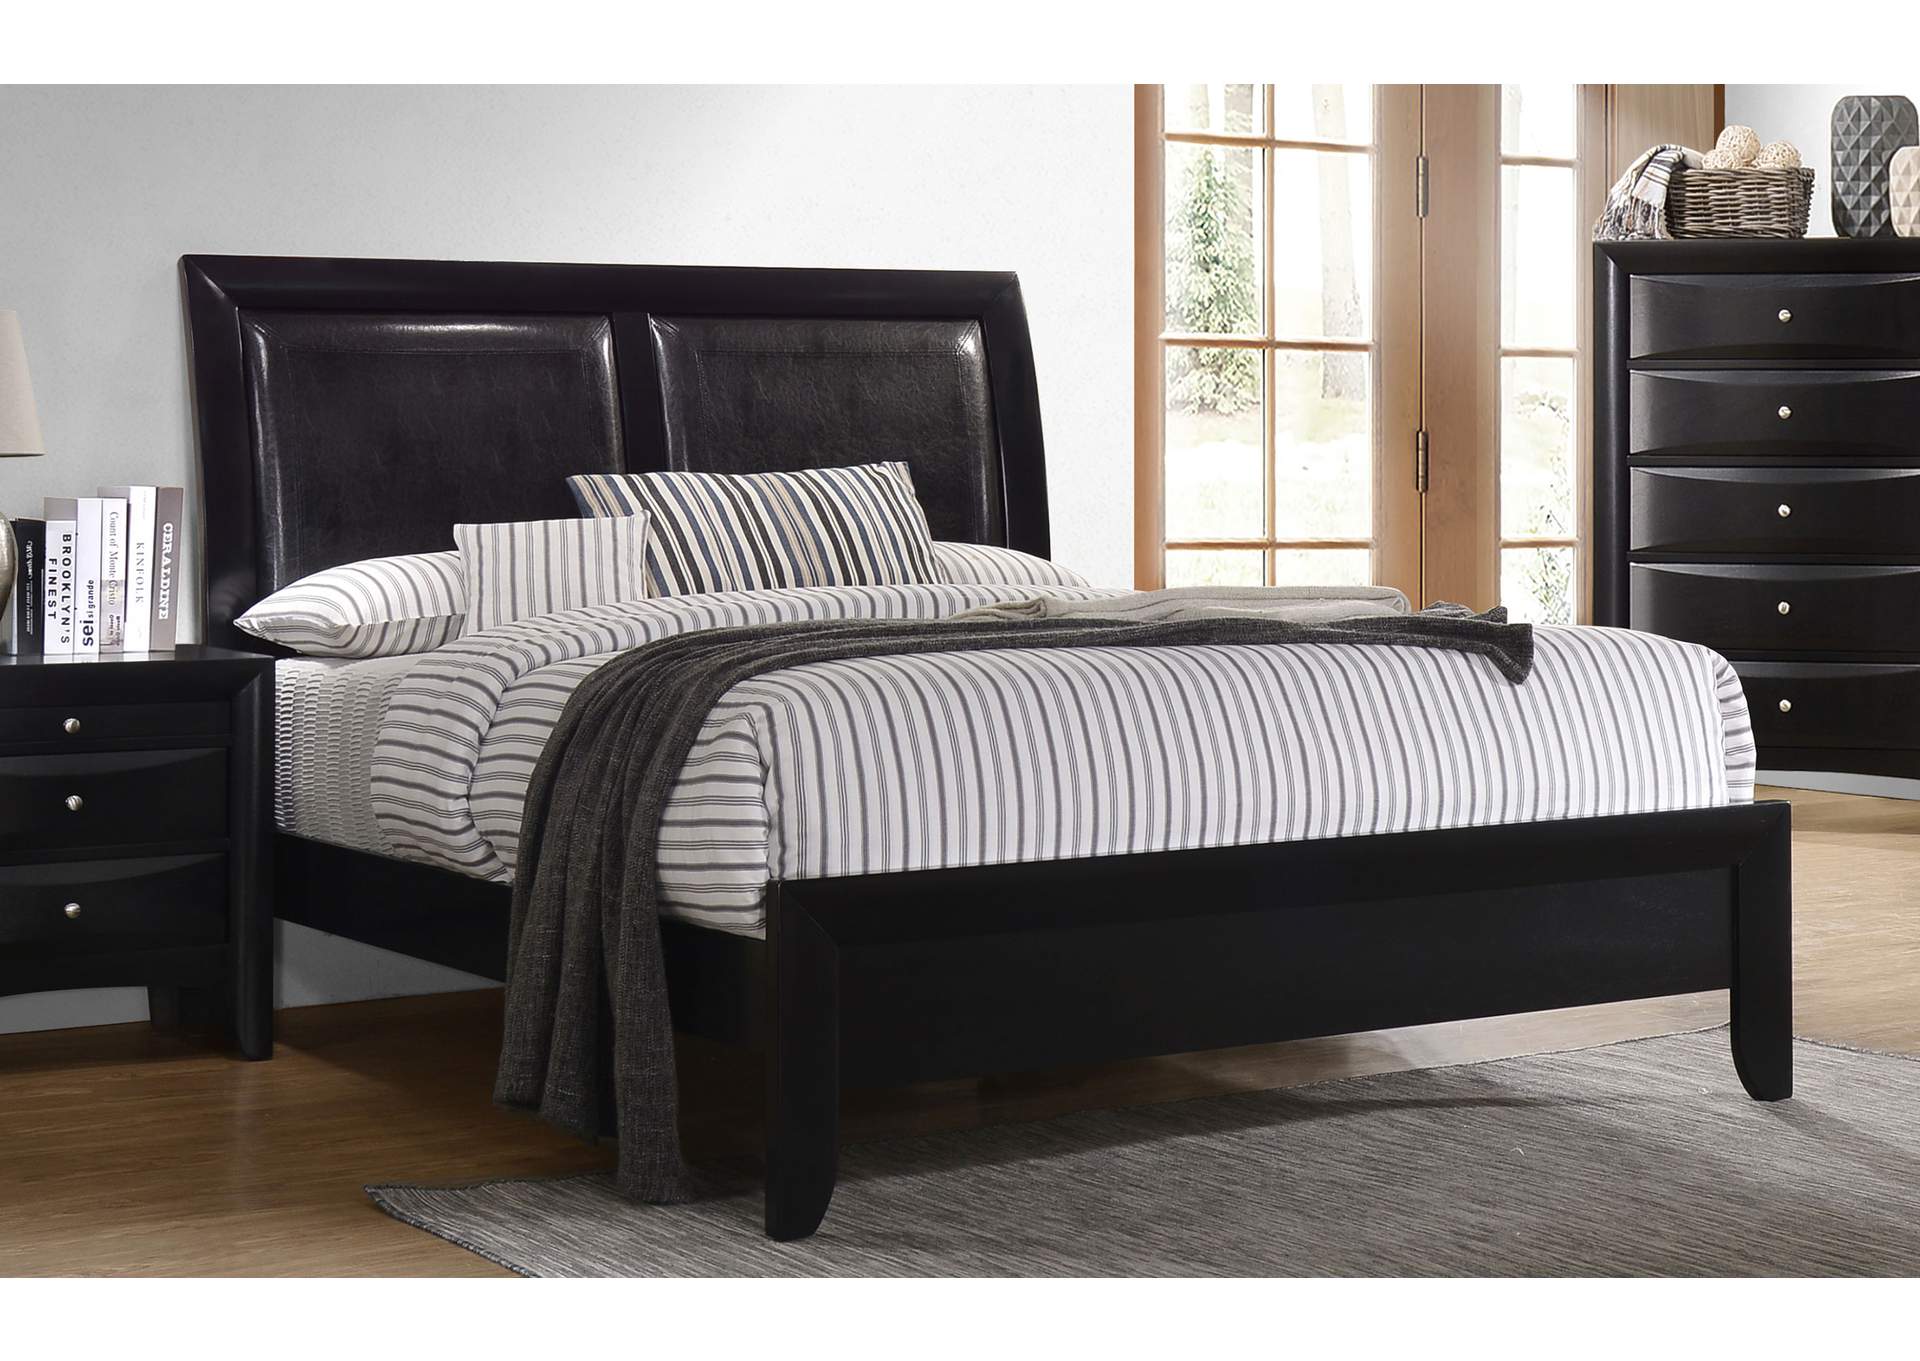 Briana Queen Upholstered Panel Bed Black,Coaster Furniture